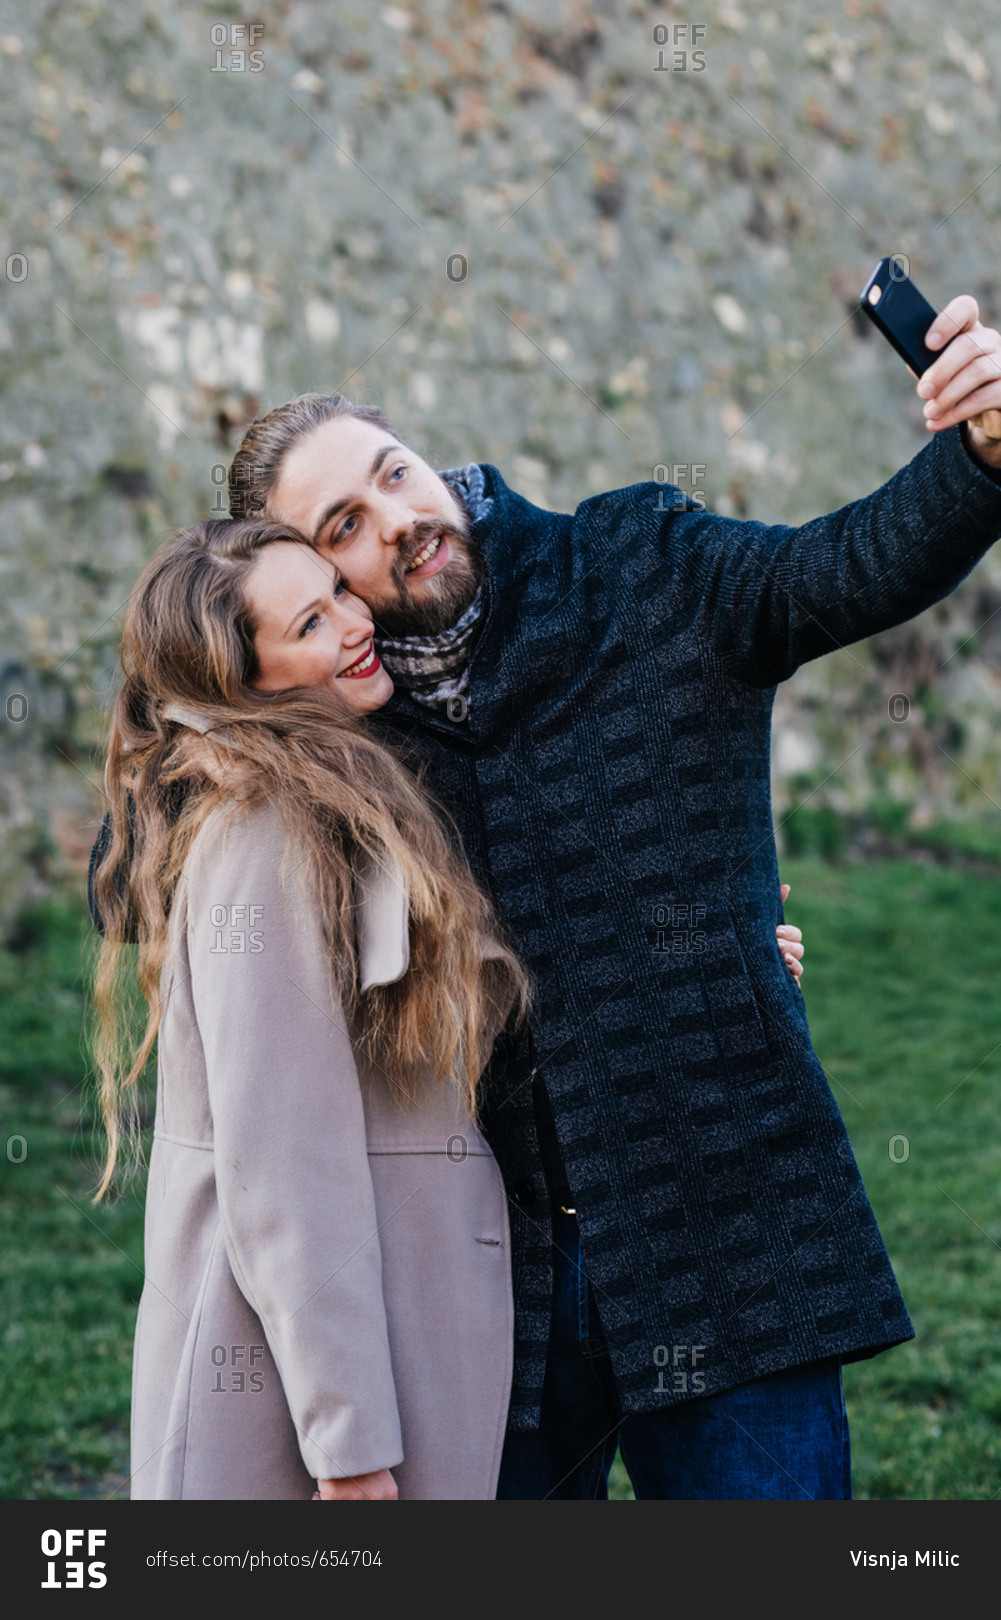 Beautiful couple hugging each other and making selfie photo with their phone camera